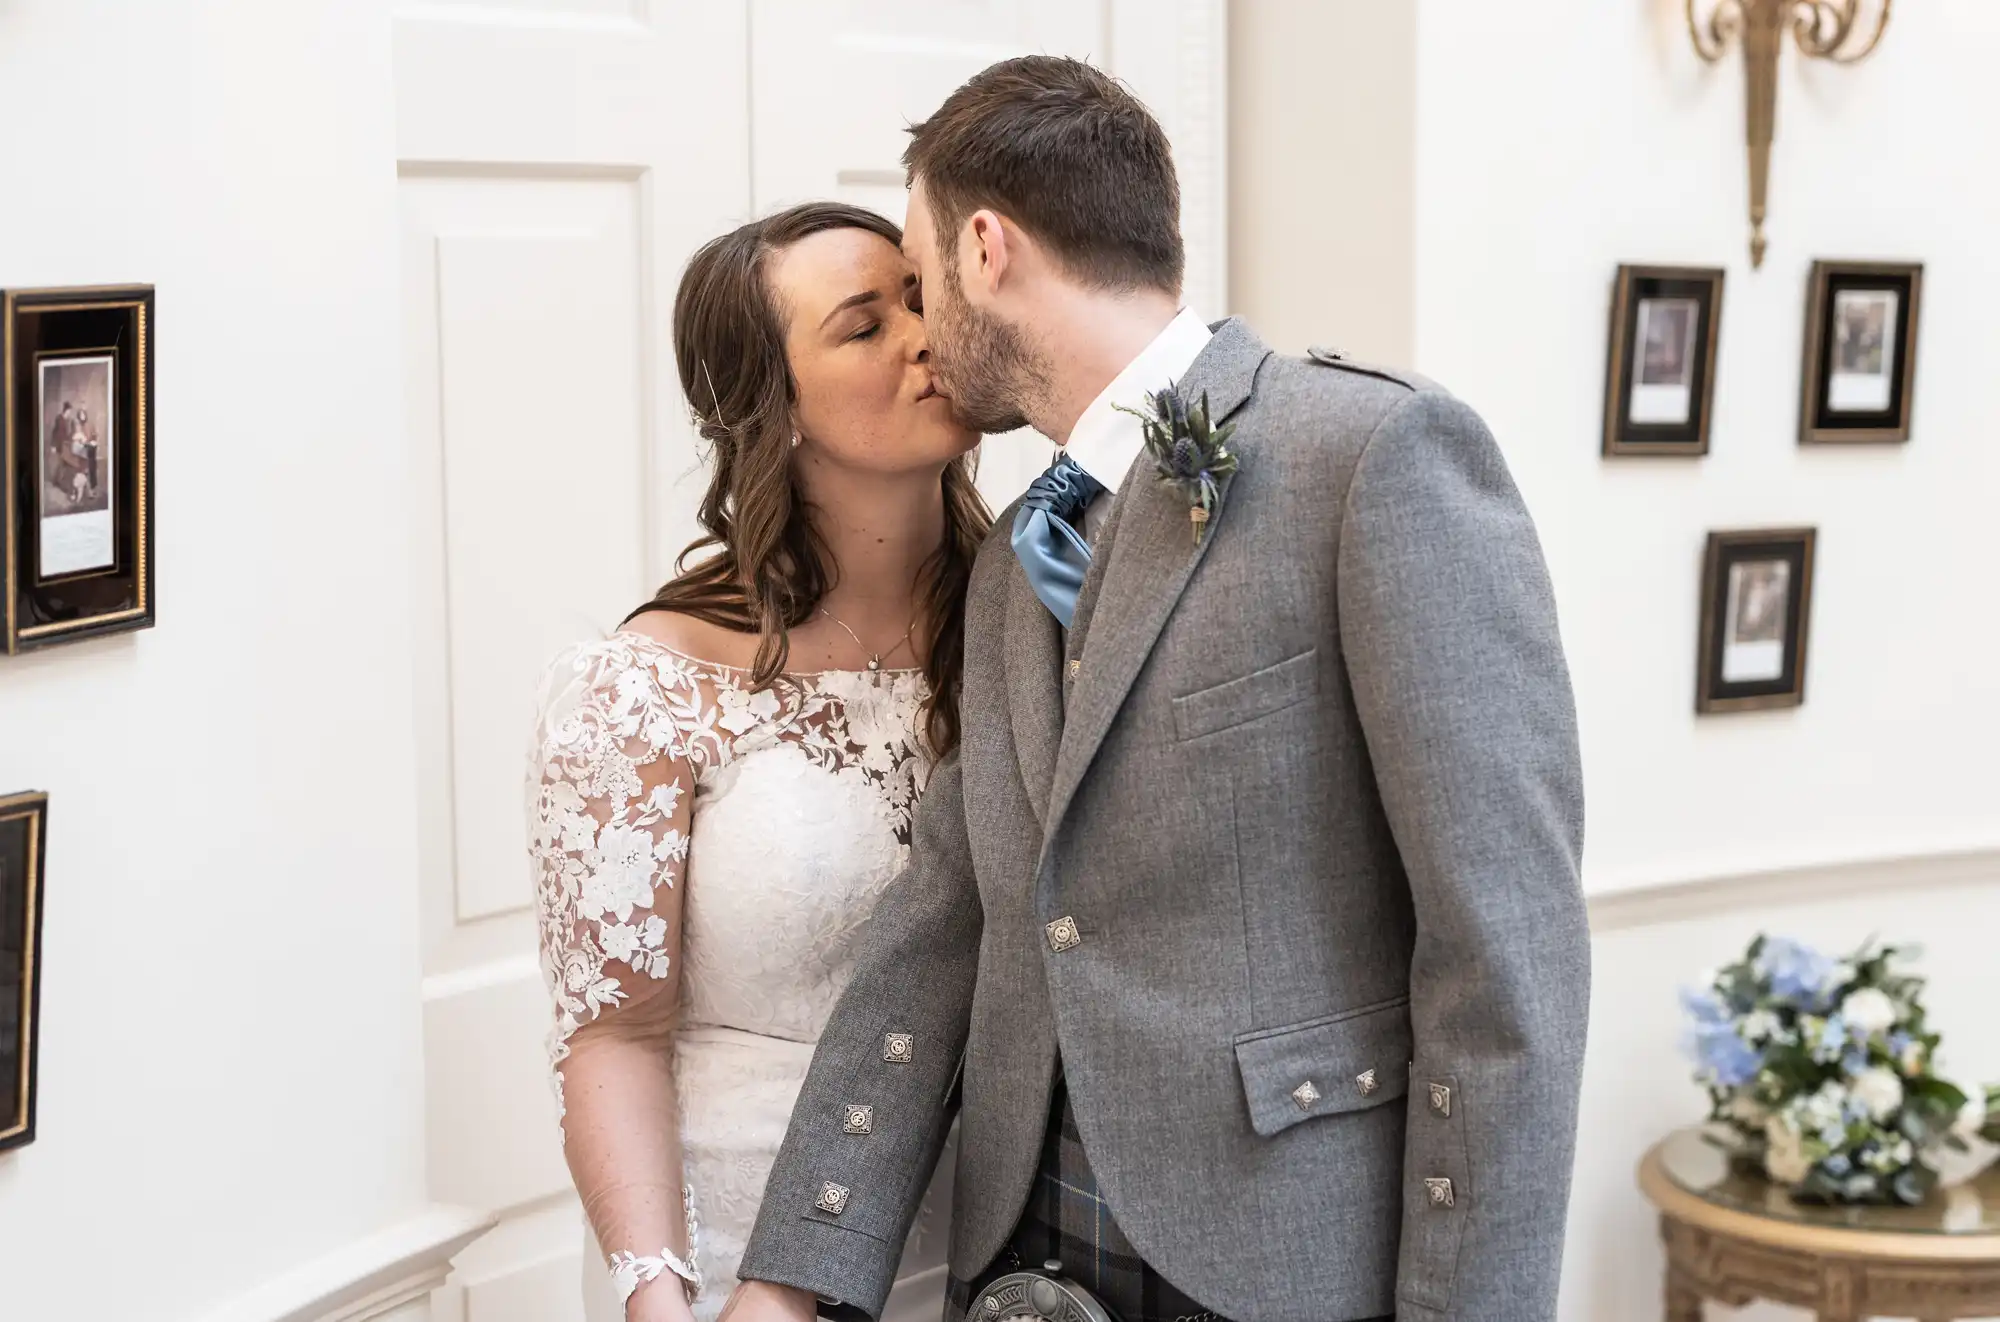 A bride in a white lace dress kisses the groom wearing a gray suit with a blue tie and tartan kilt in an elegant room with framed pictures.